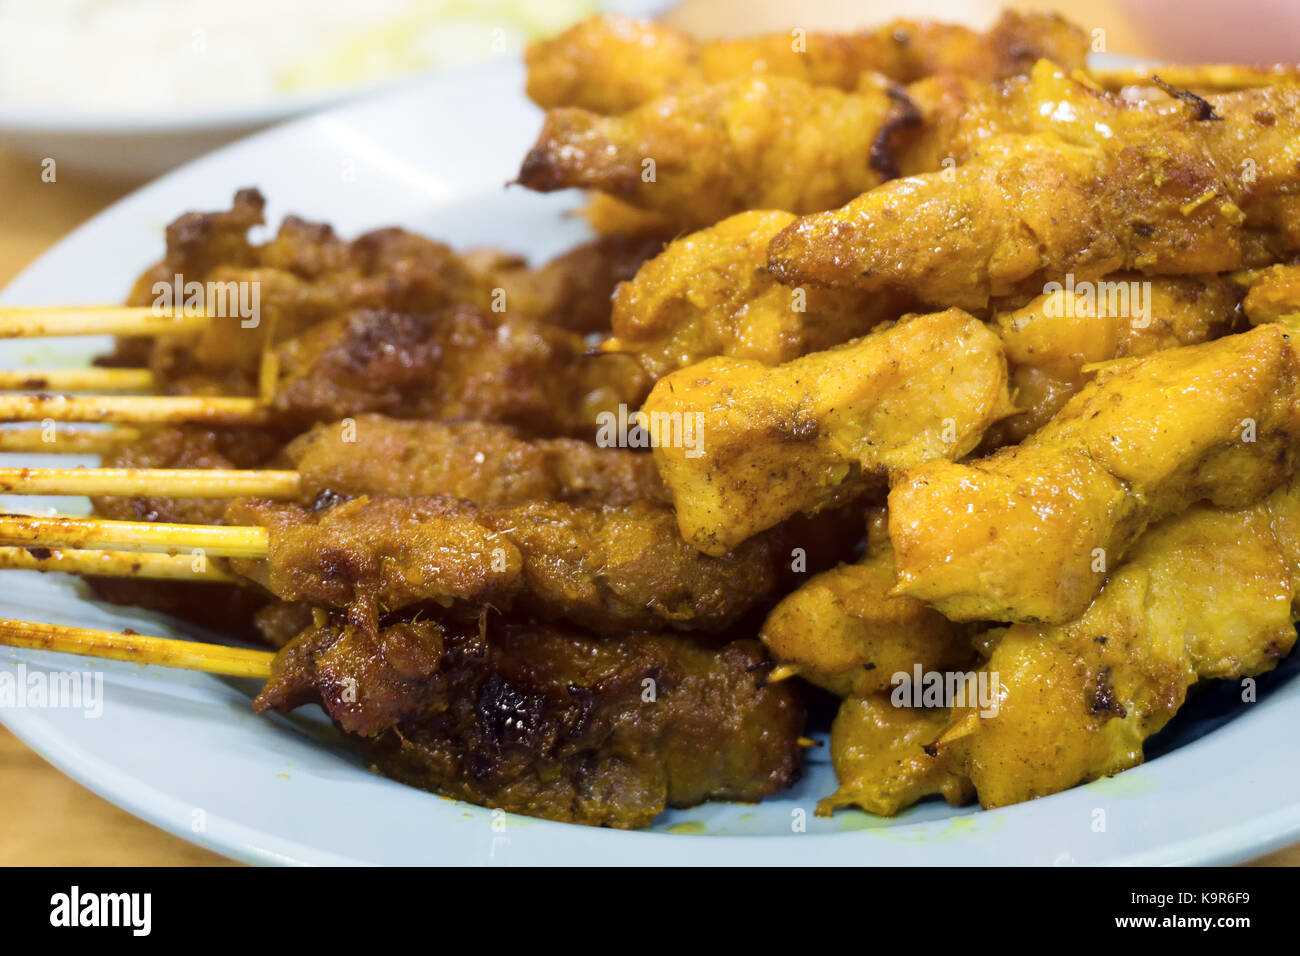 Chicken and beef sate or satay, famous Malaysian Food. Stock Photo